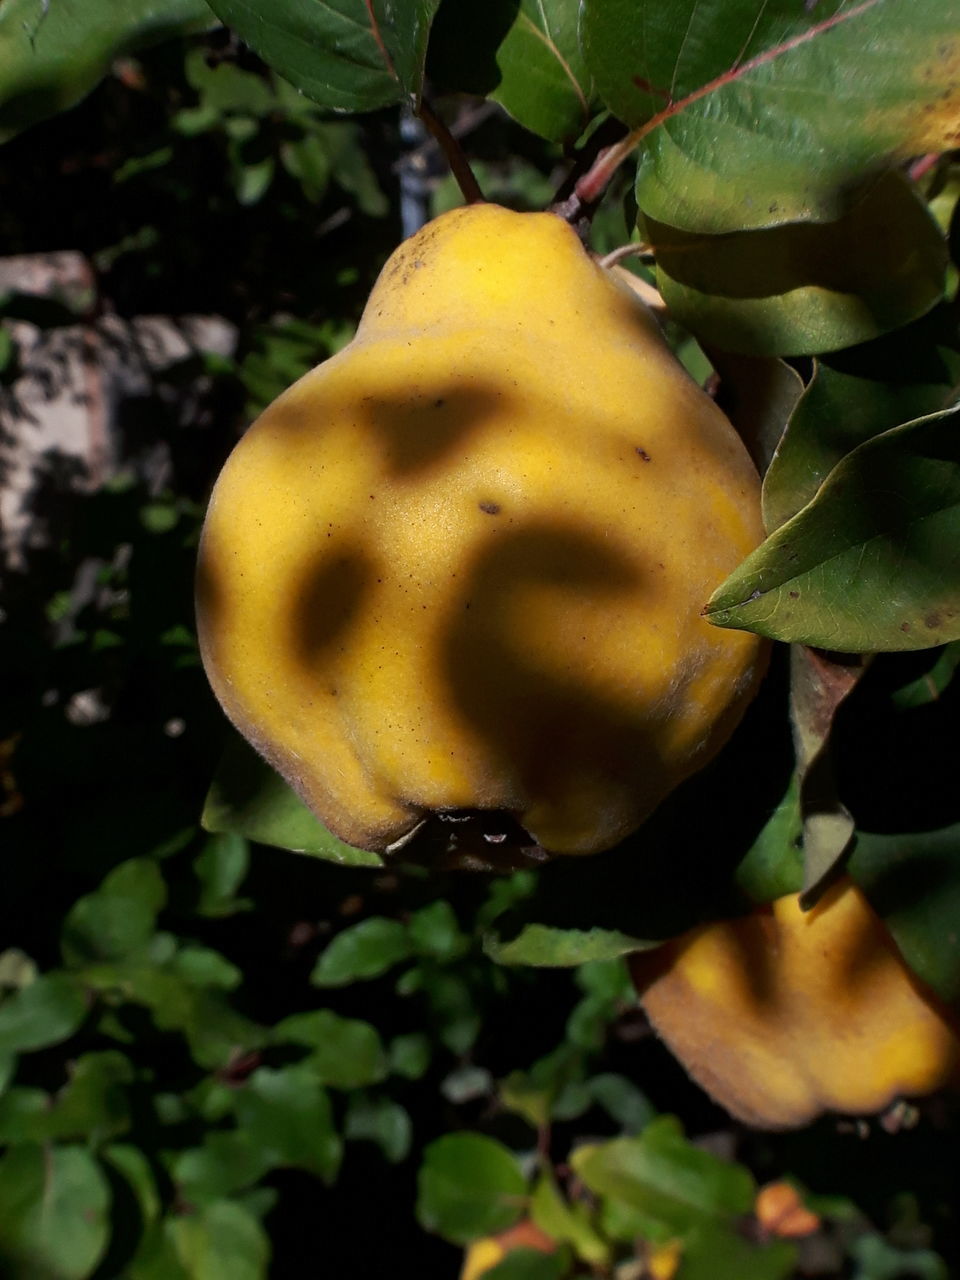 CLOSE-UP OF FRUIT ON PLANT